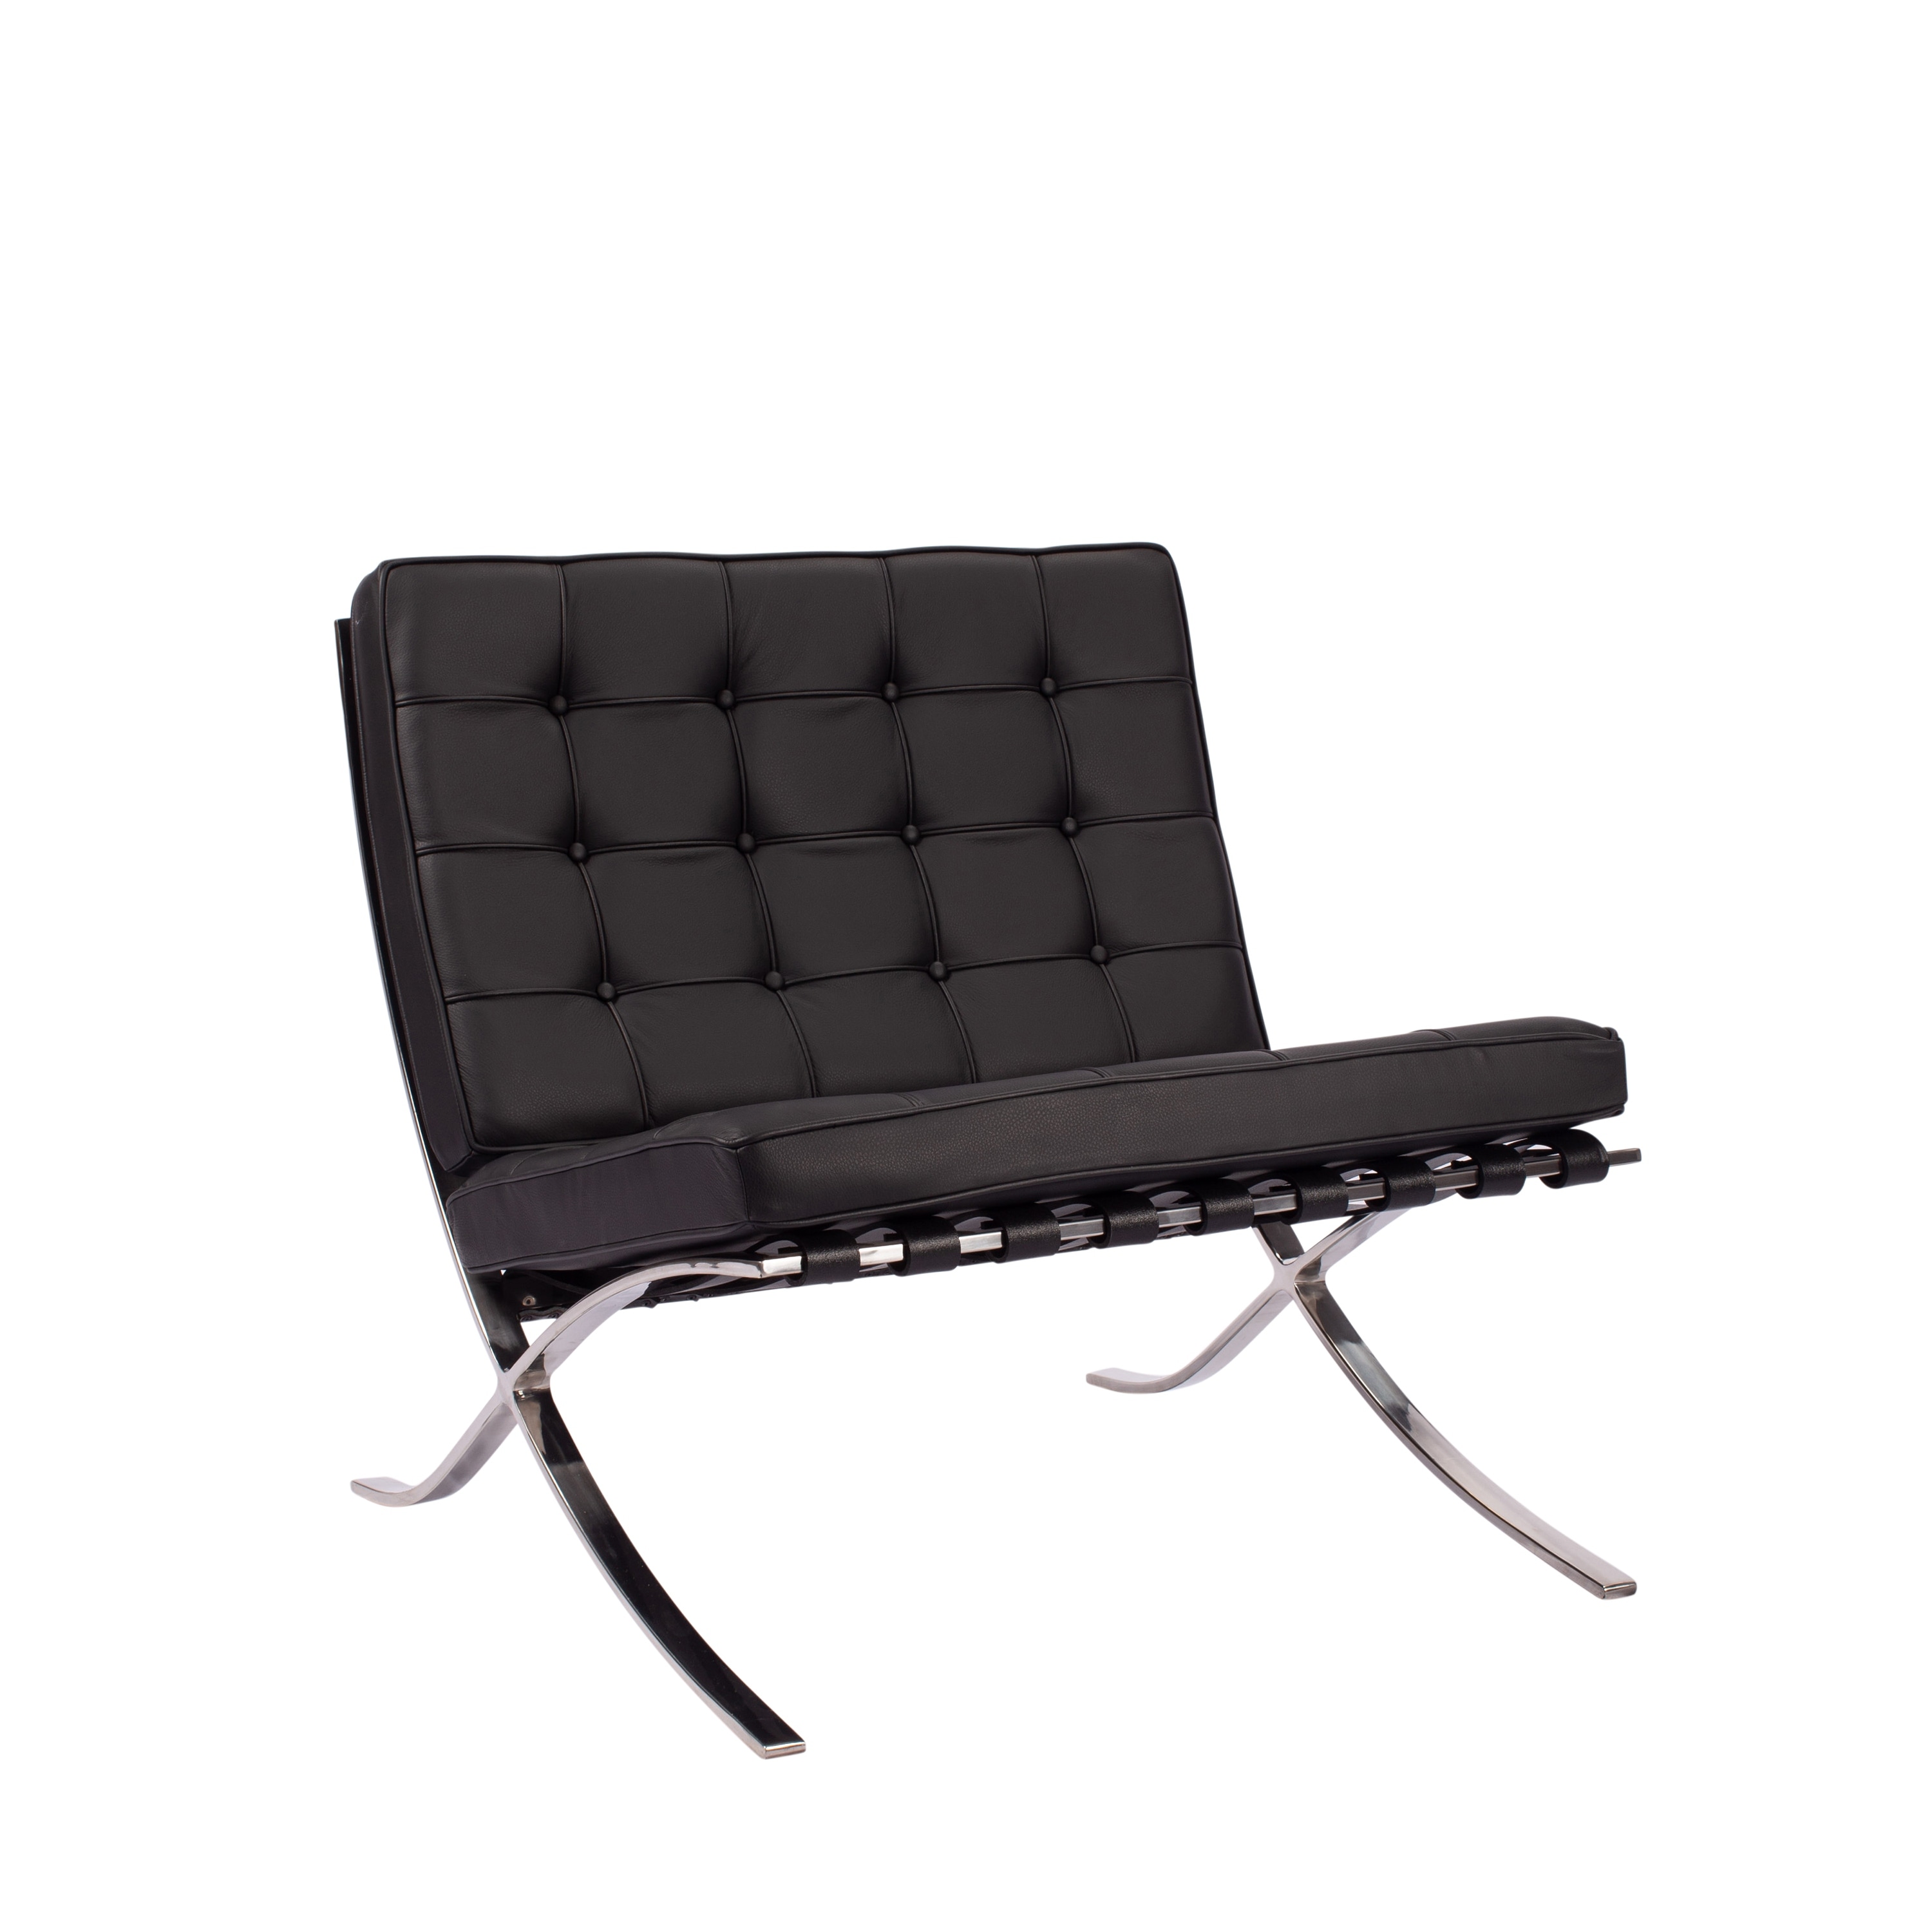 Barcelona Chair, Black Leather Brushed Chrome - On Sale - Overstock - 32746627